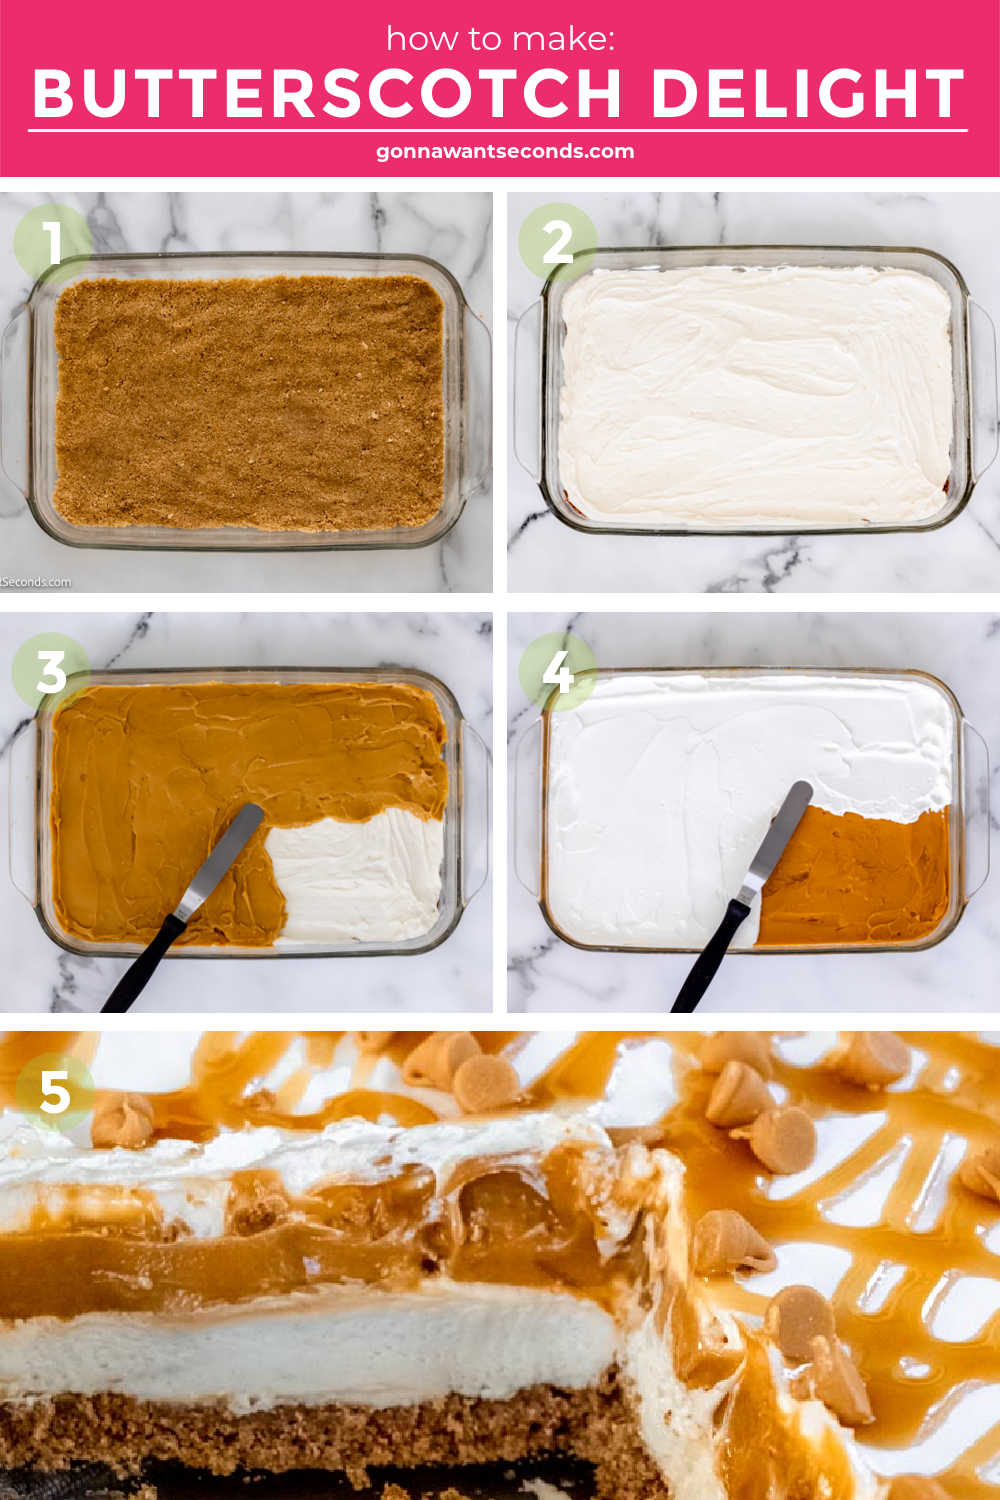 Step by step how to make butterscotch delight